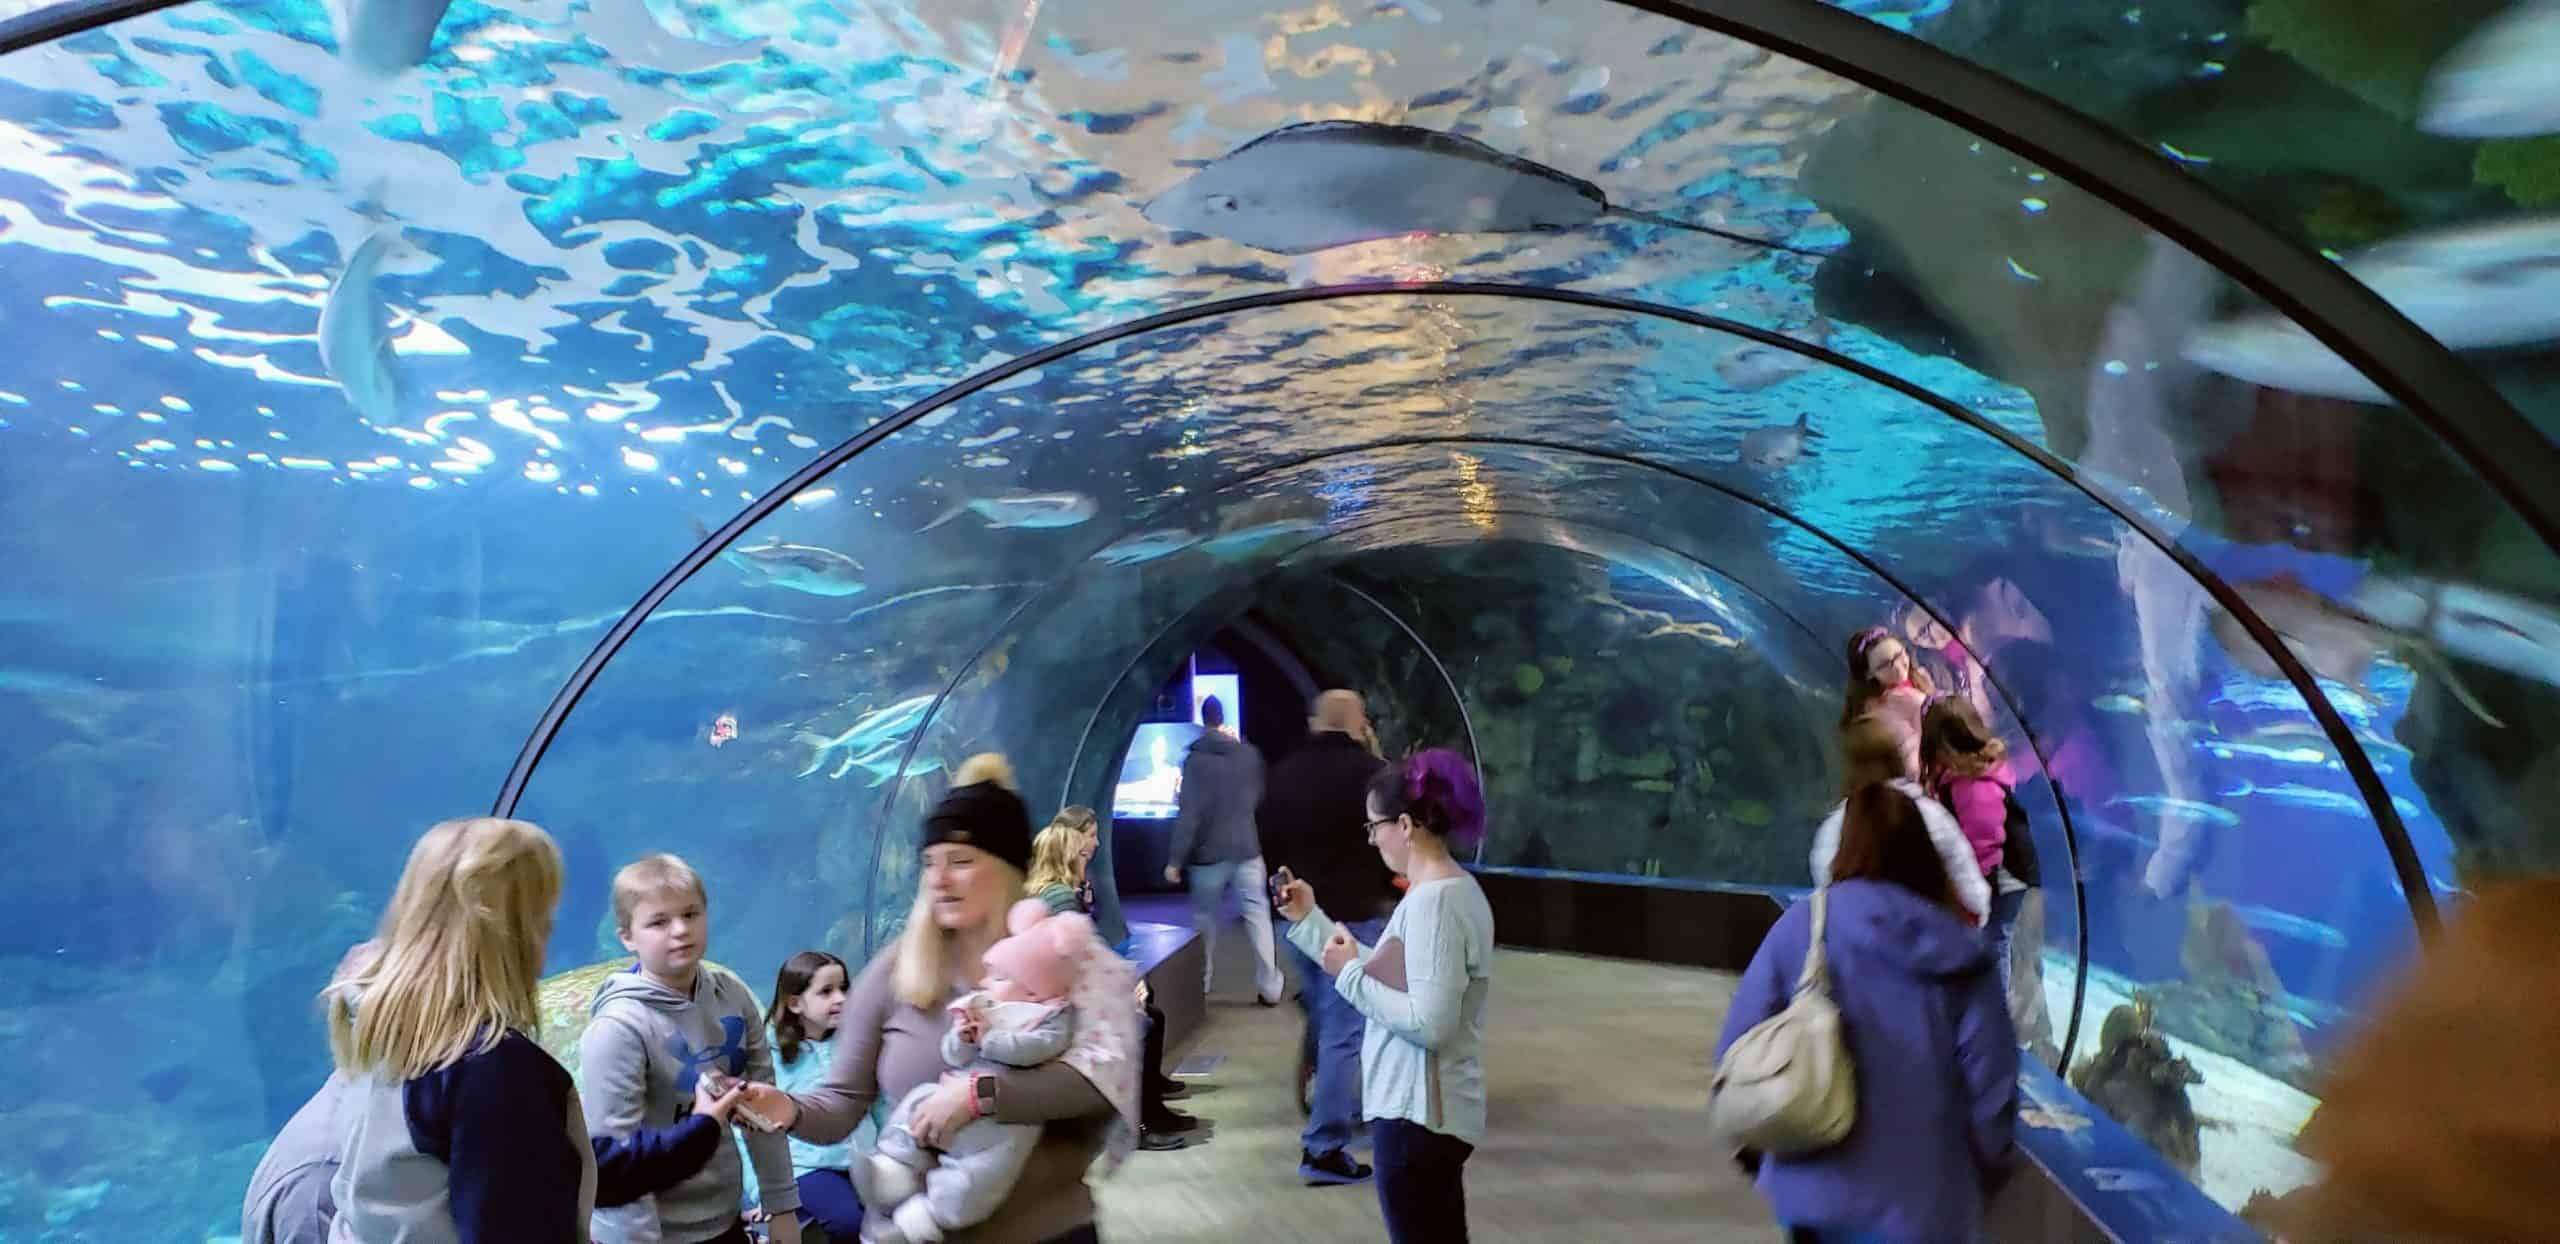 Best things to do in Omaha Nebraska - Tim and Lisa Trudell - Shark tunnel at Omaha Henry Doorly Zoo